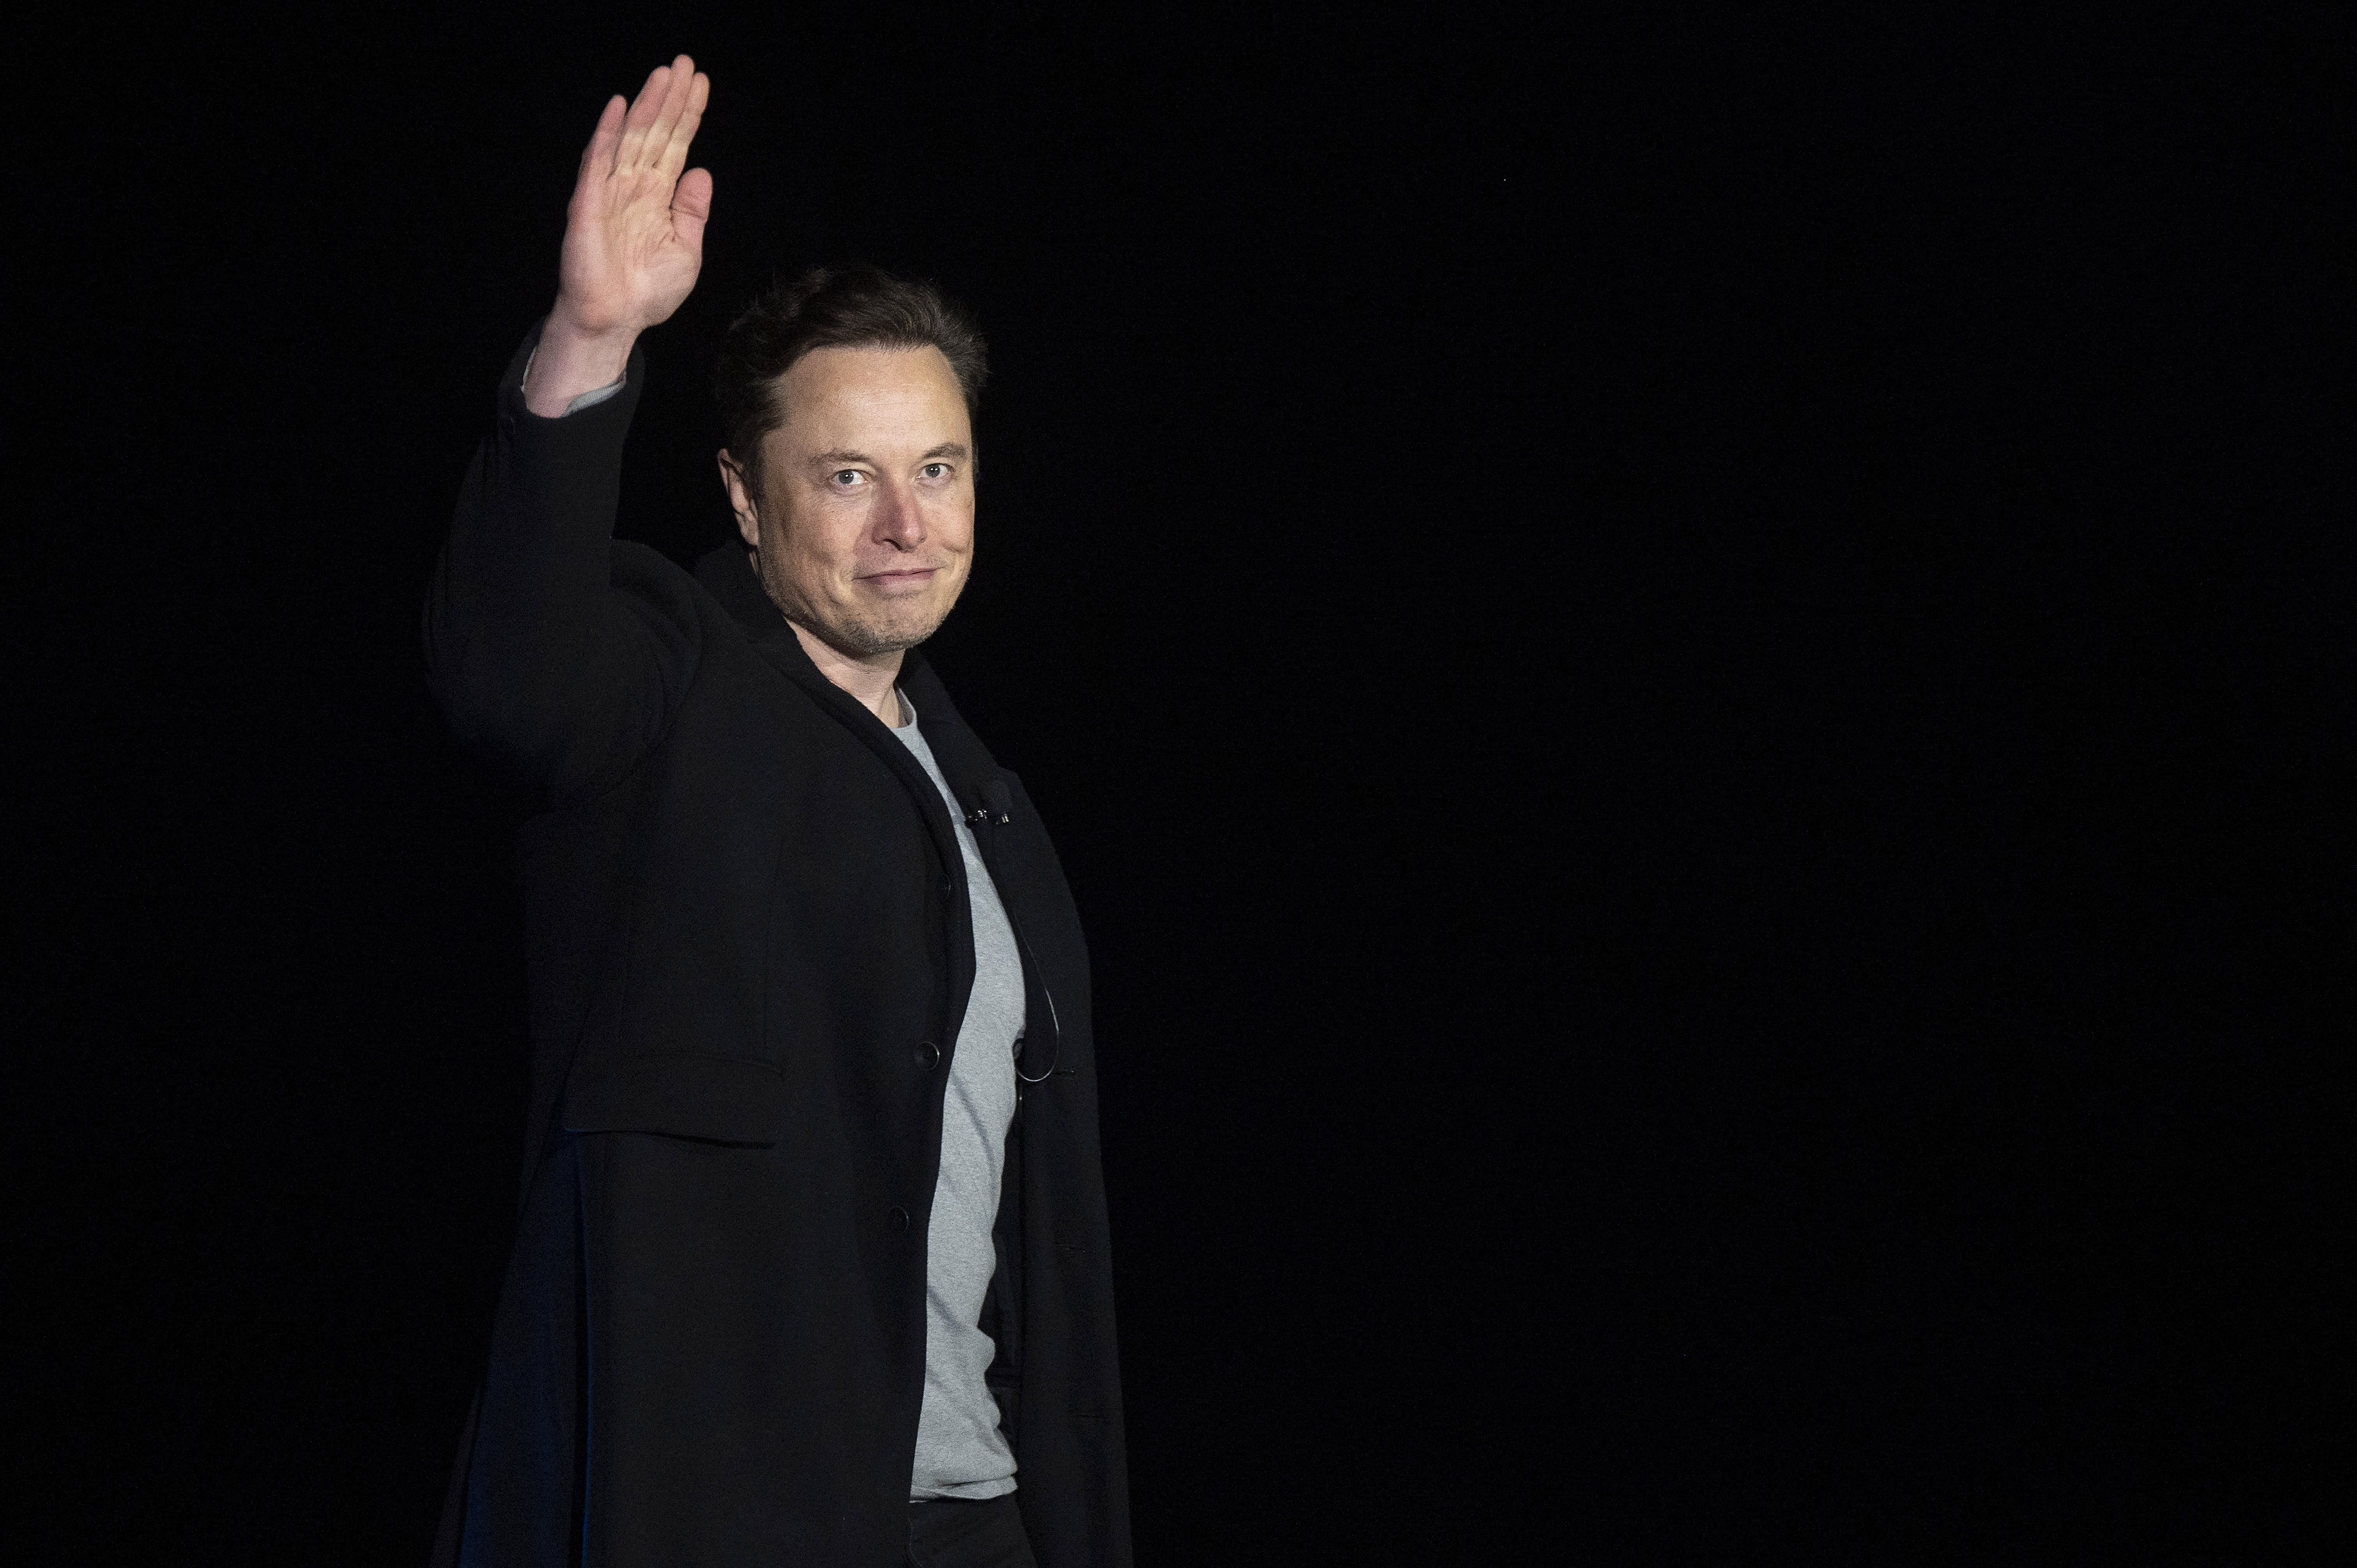 Elon Musk’s plans for Twitter could make its misinformation problems worse